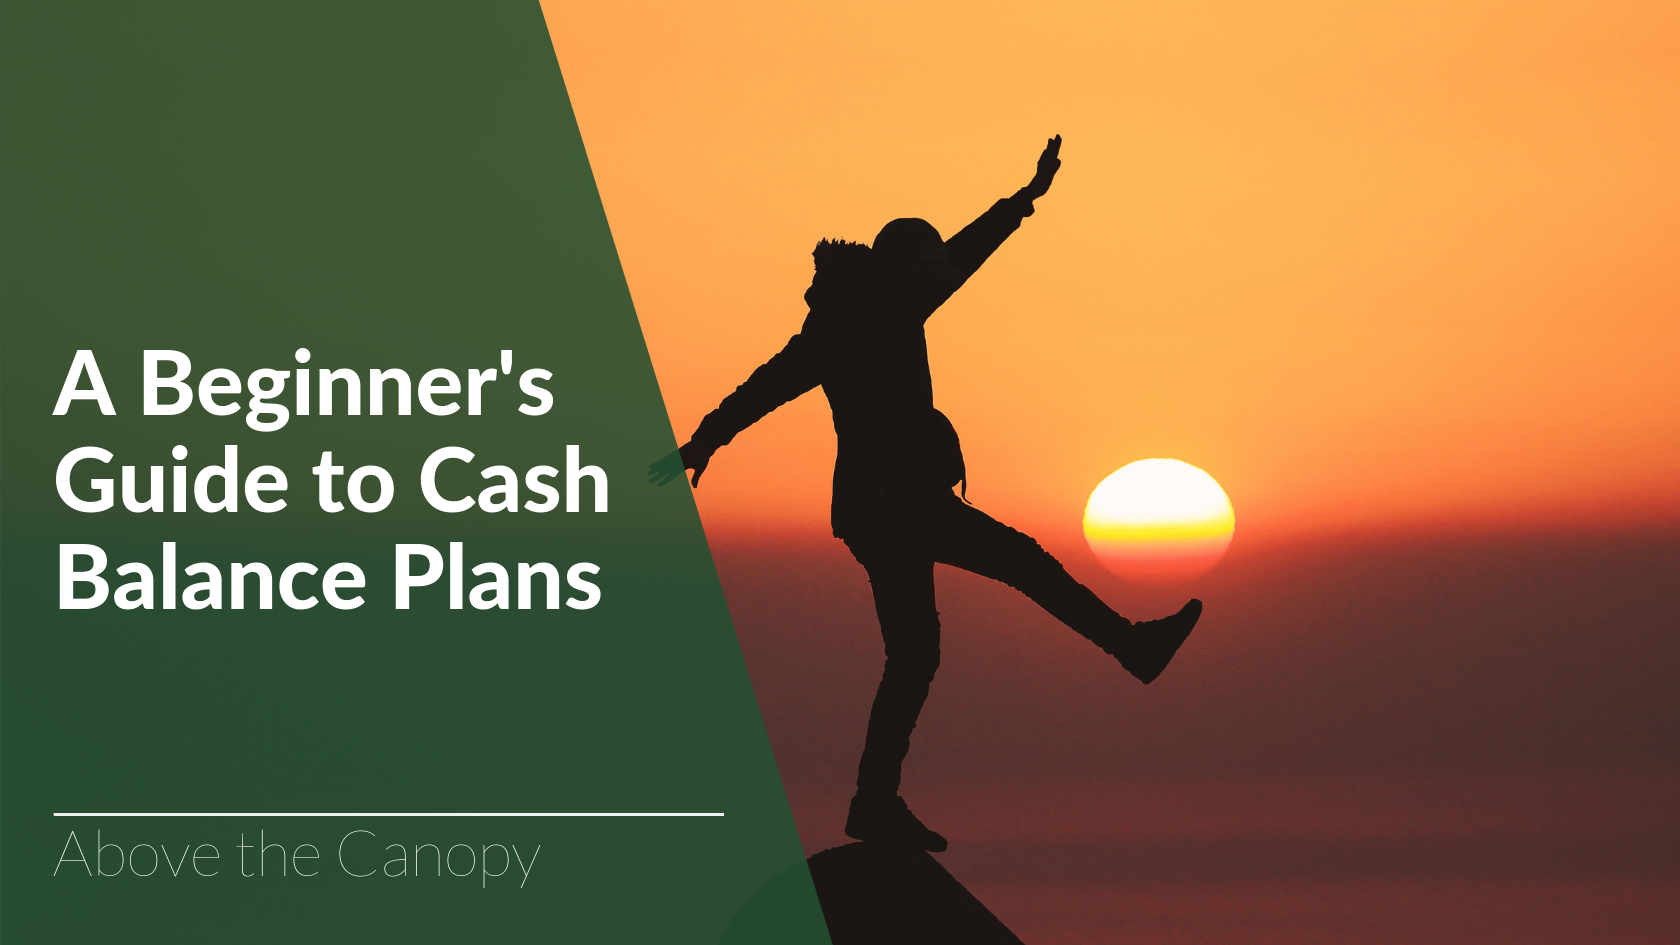 A Beginner's Guide To Cash Balance Plans